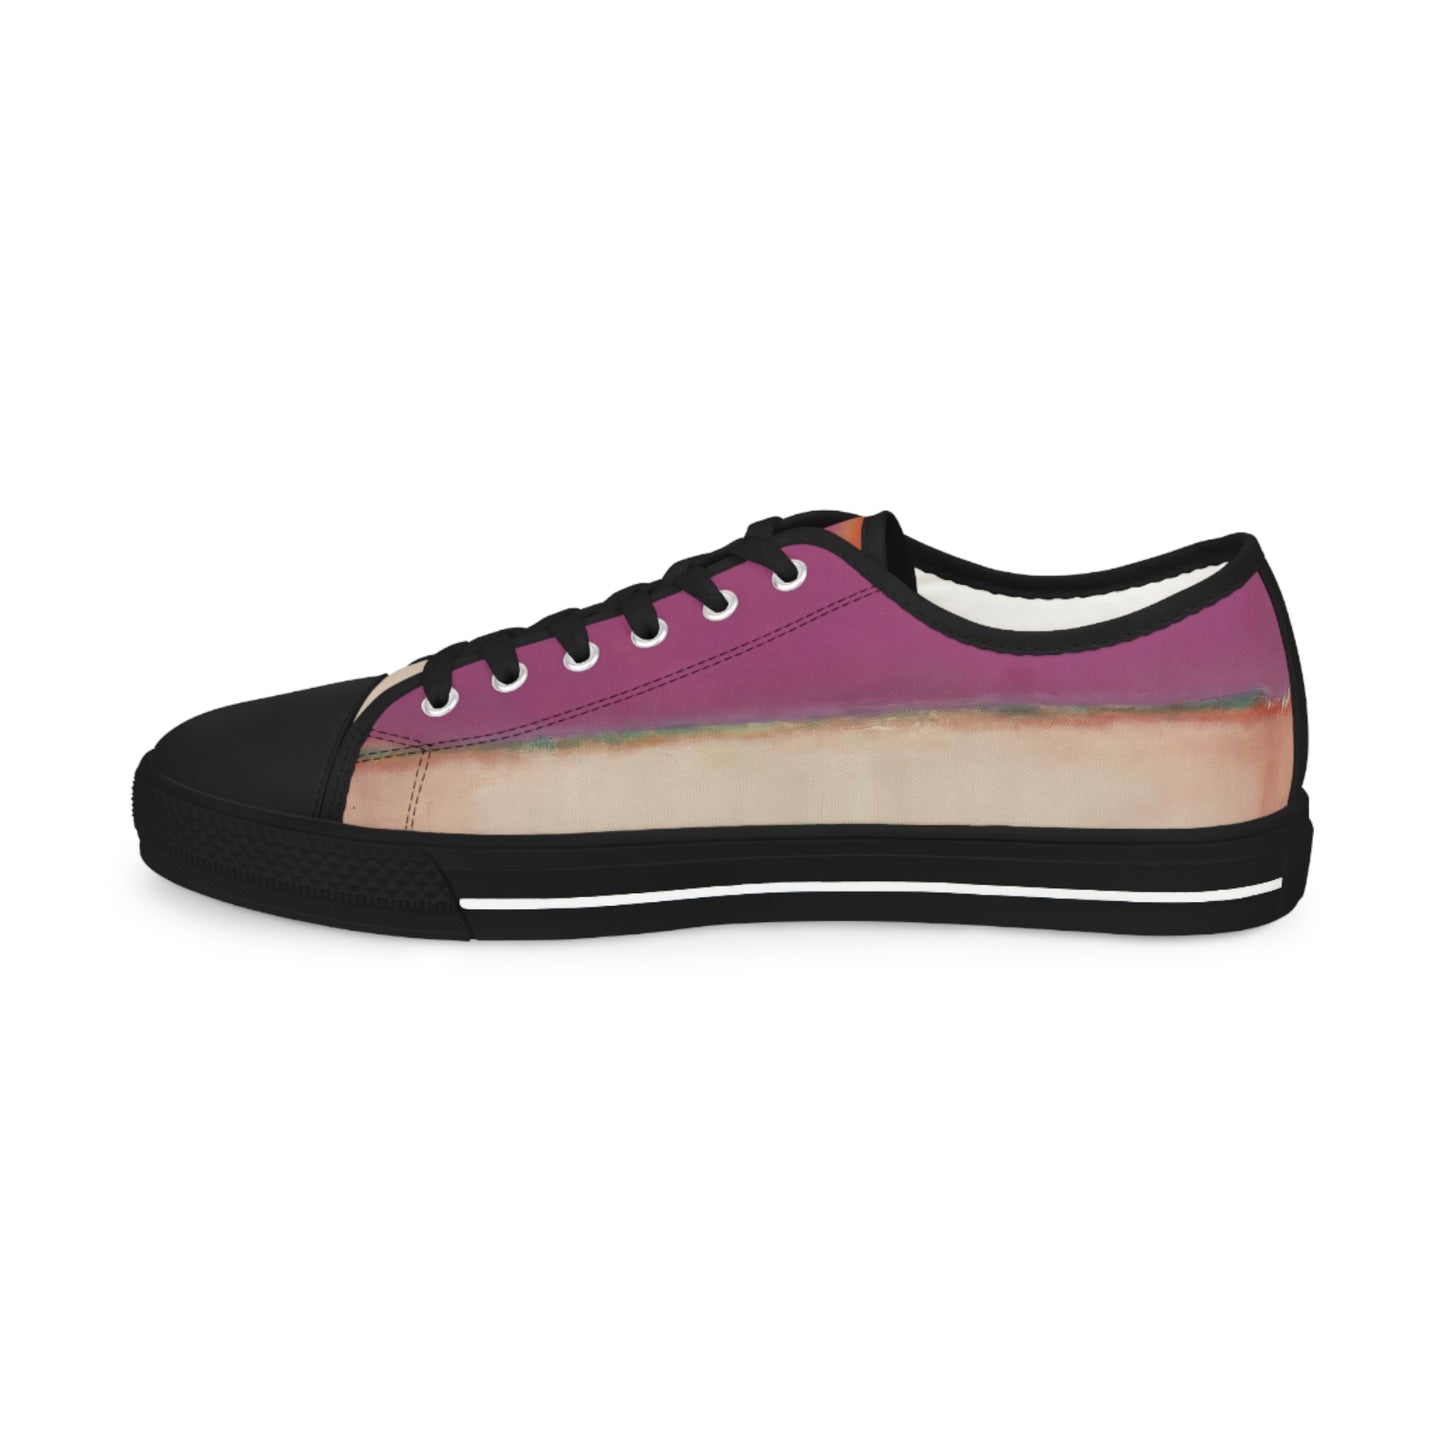  MARK ROTHKO - ABSTRACT - LOW TOP ART SNEAKERS FOR HIM